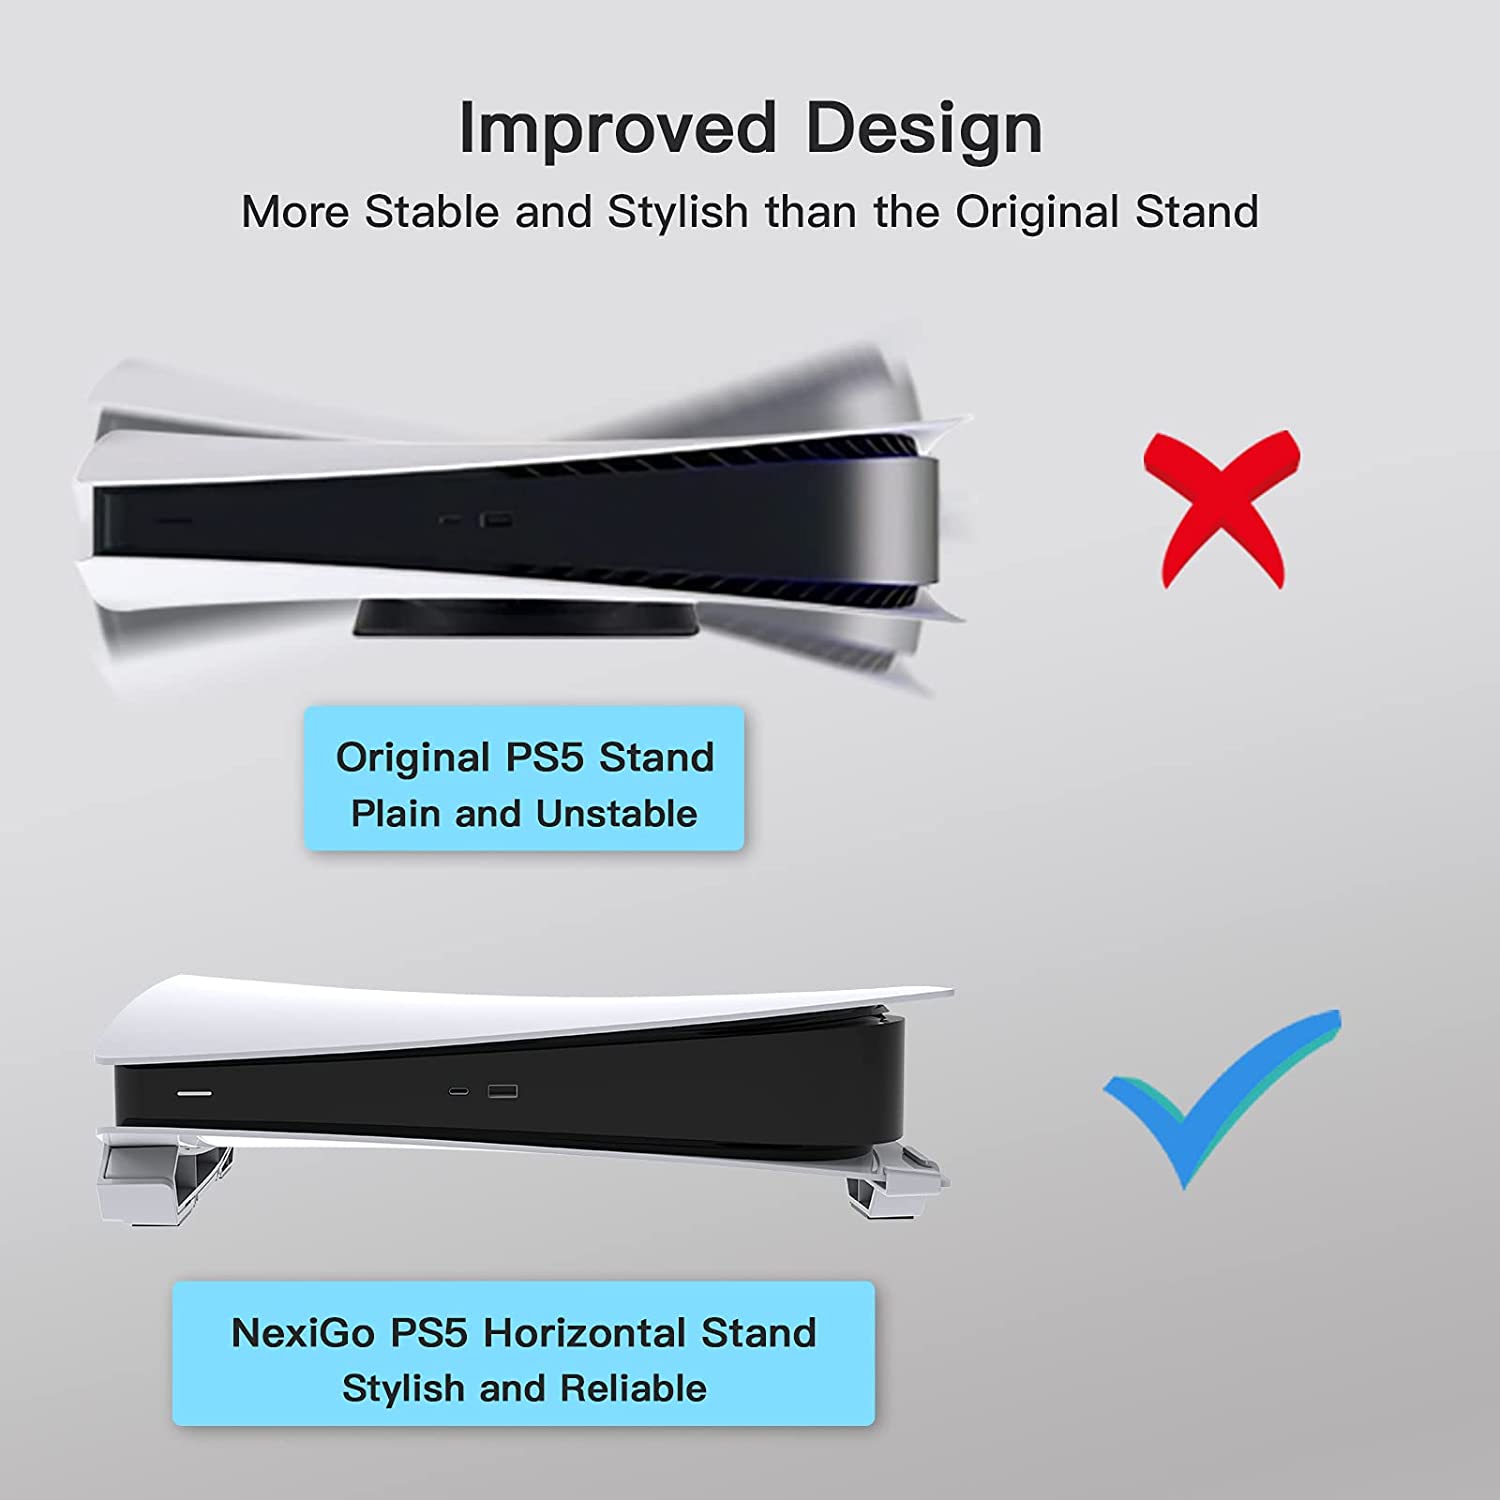 Our stand provides a perfect alternative to the original PS5 stand for stable horizontal placement.